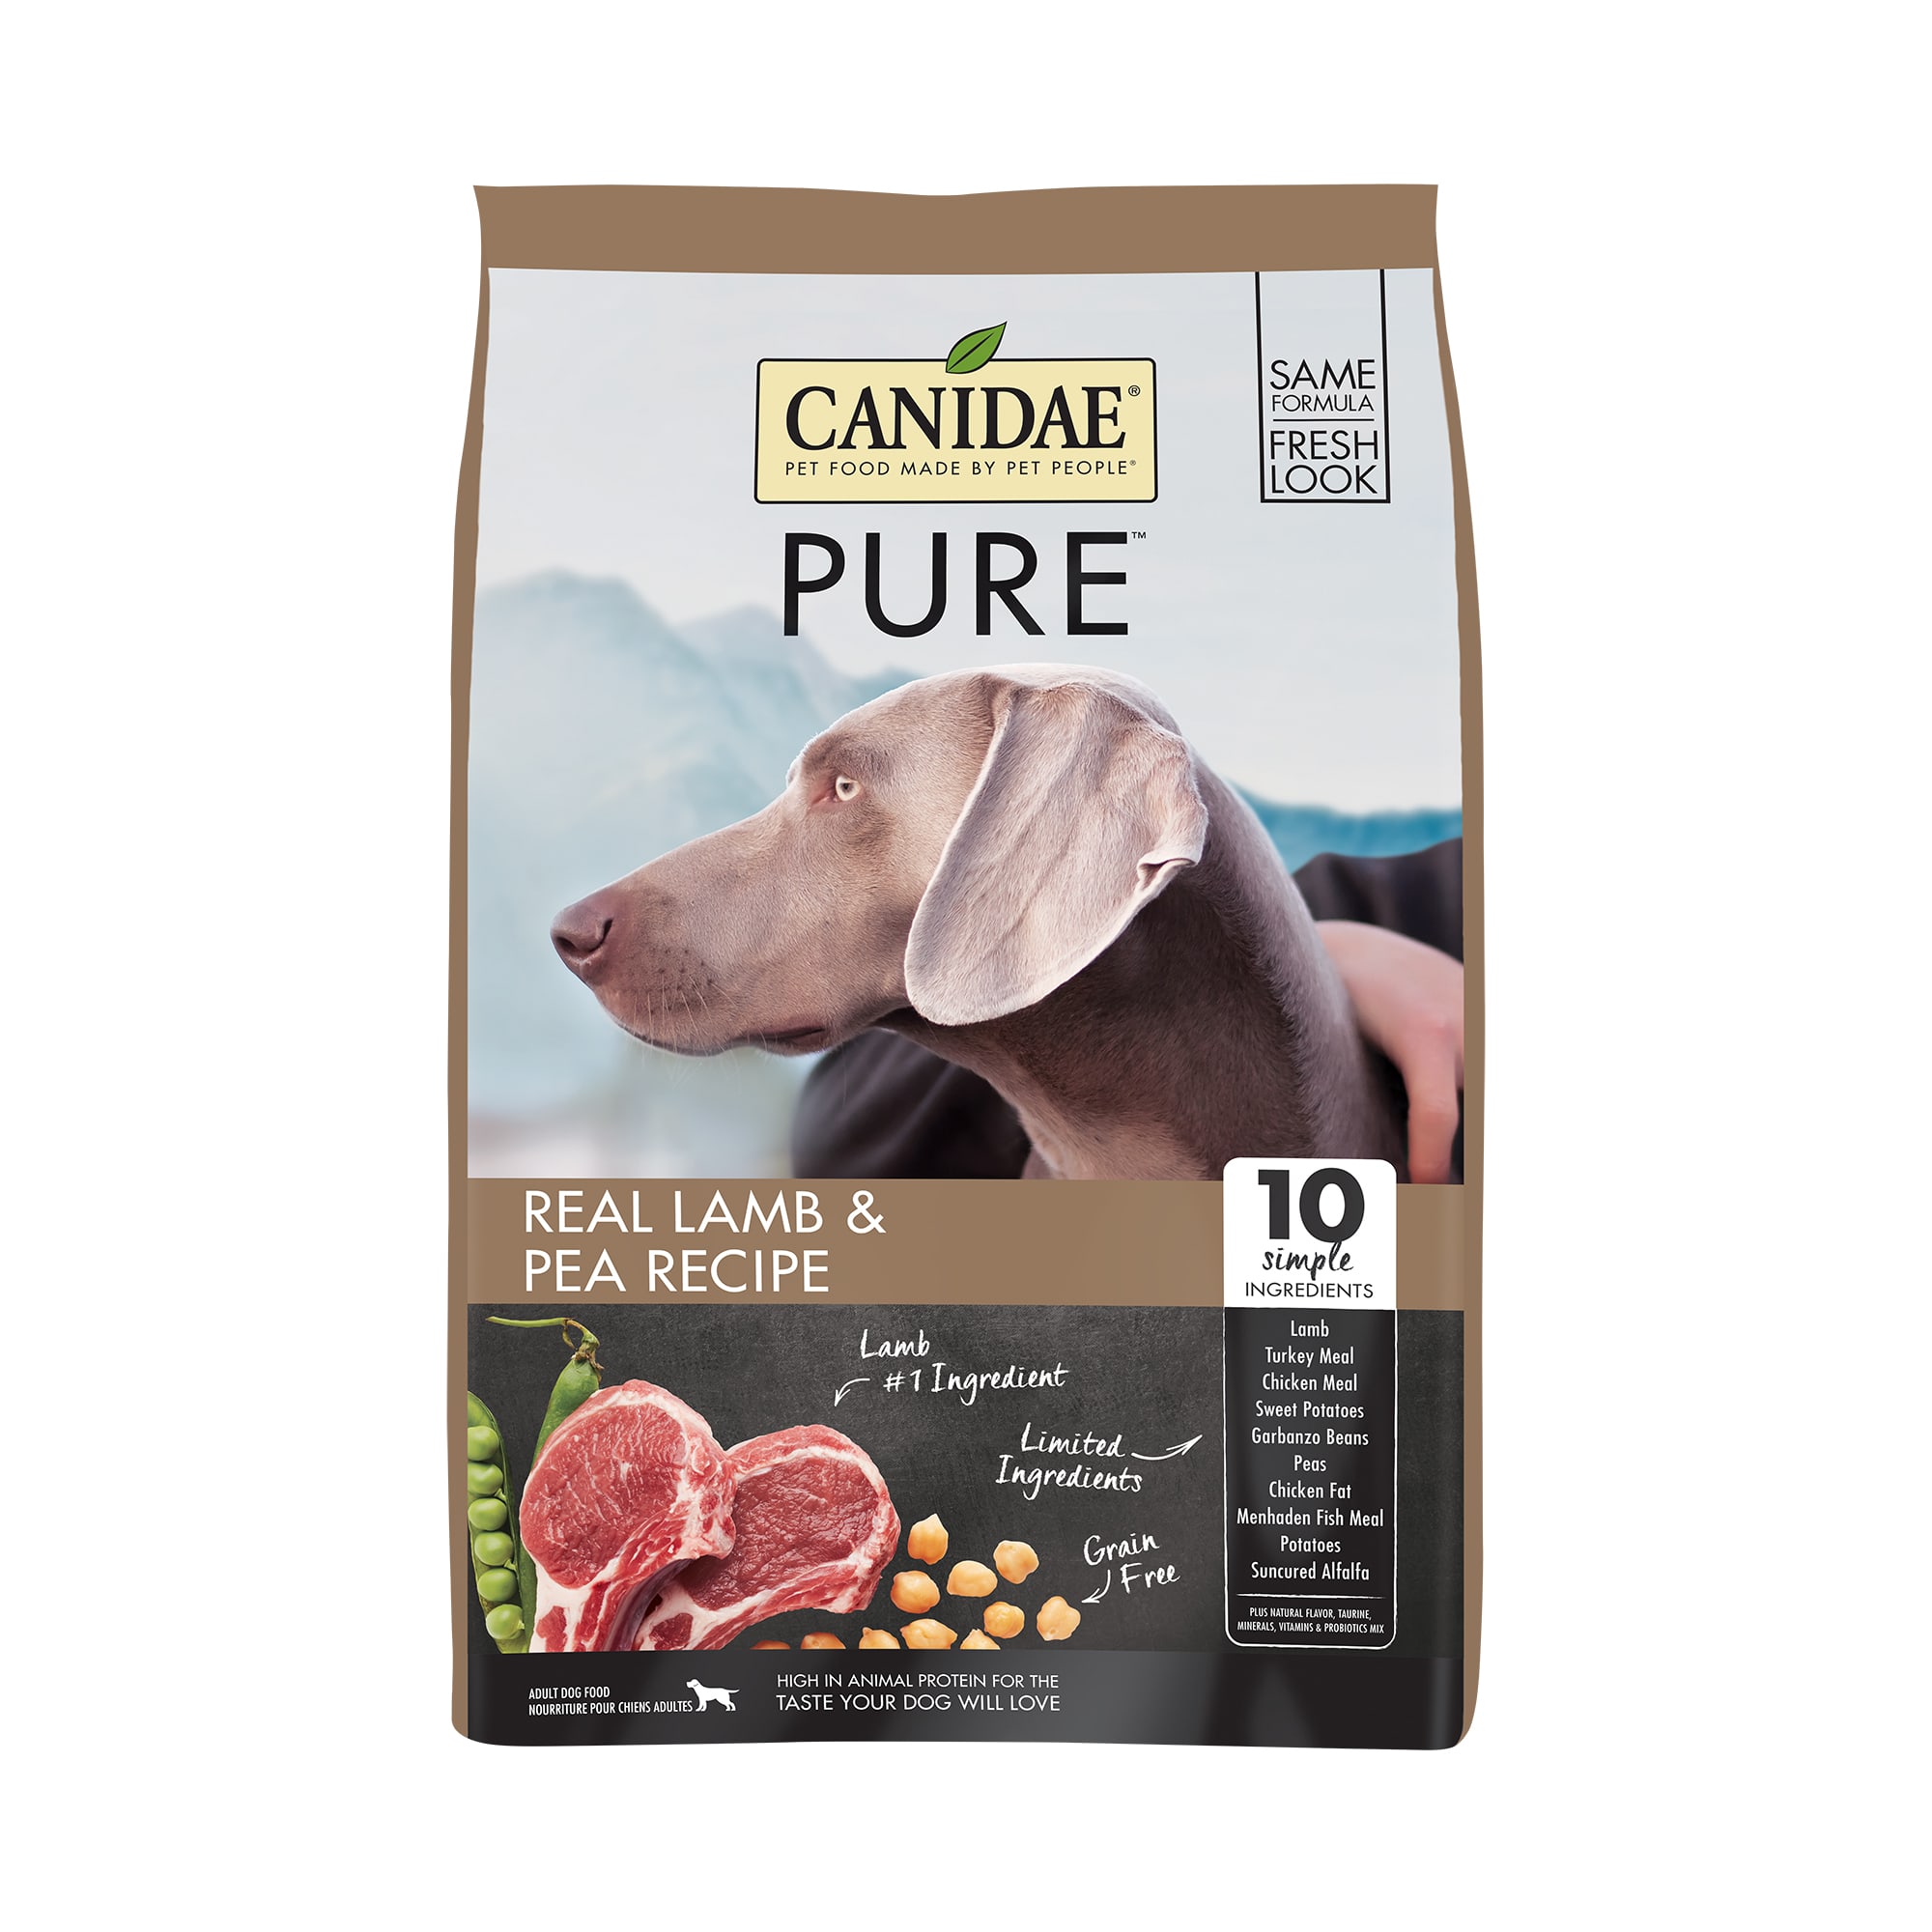 CANIDAE PURE Grain Free Limited Ingredient Real Lamb & Pea Dry Dog Food, 24 lbs. - Pet Food Ratings